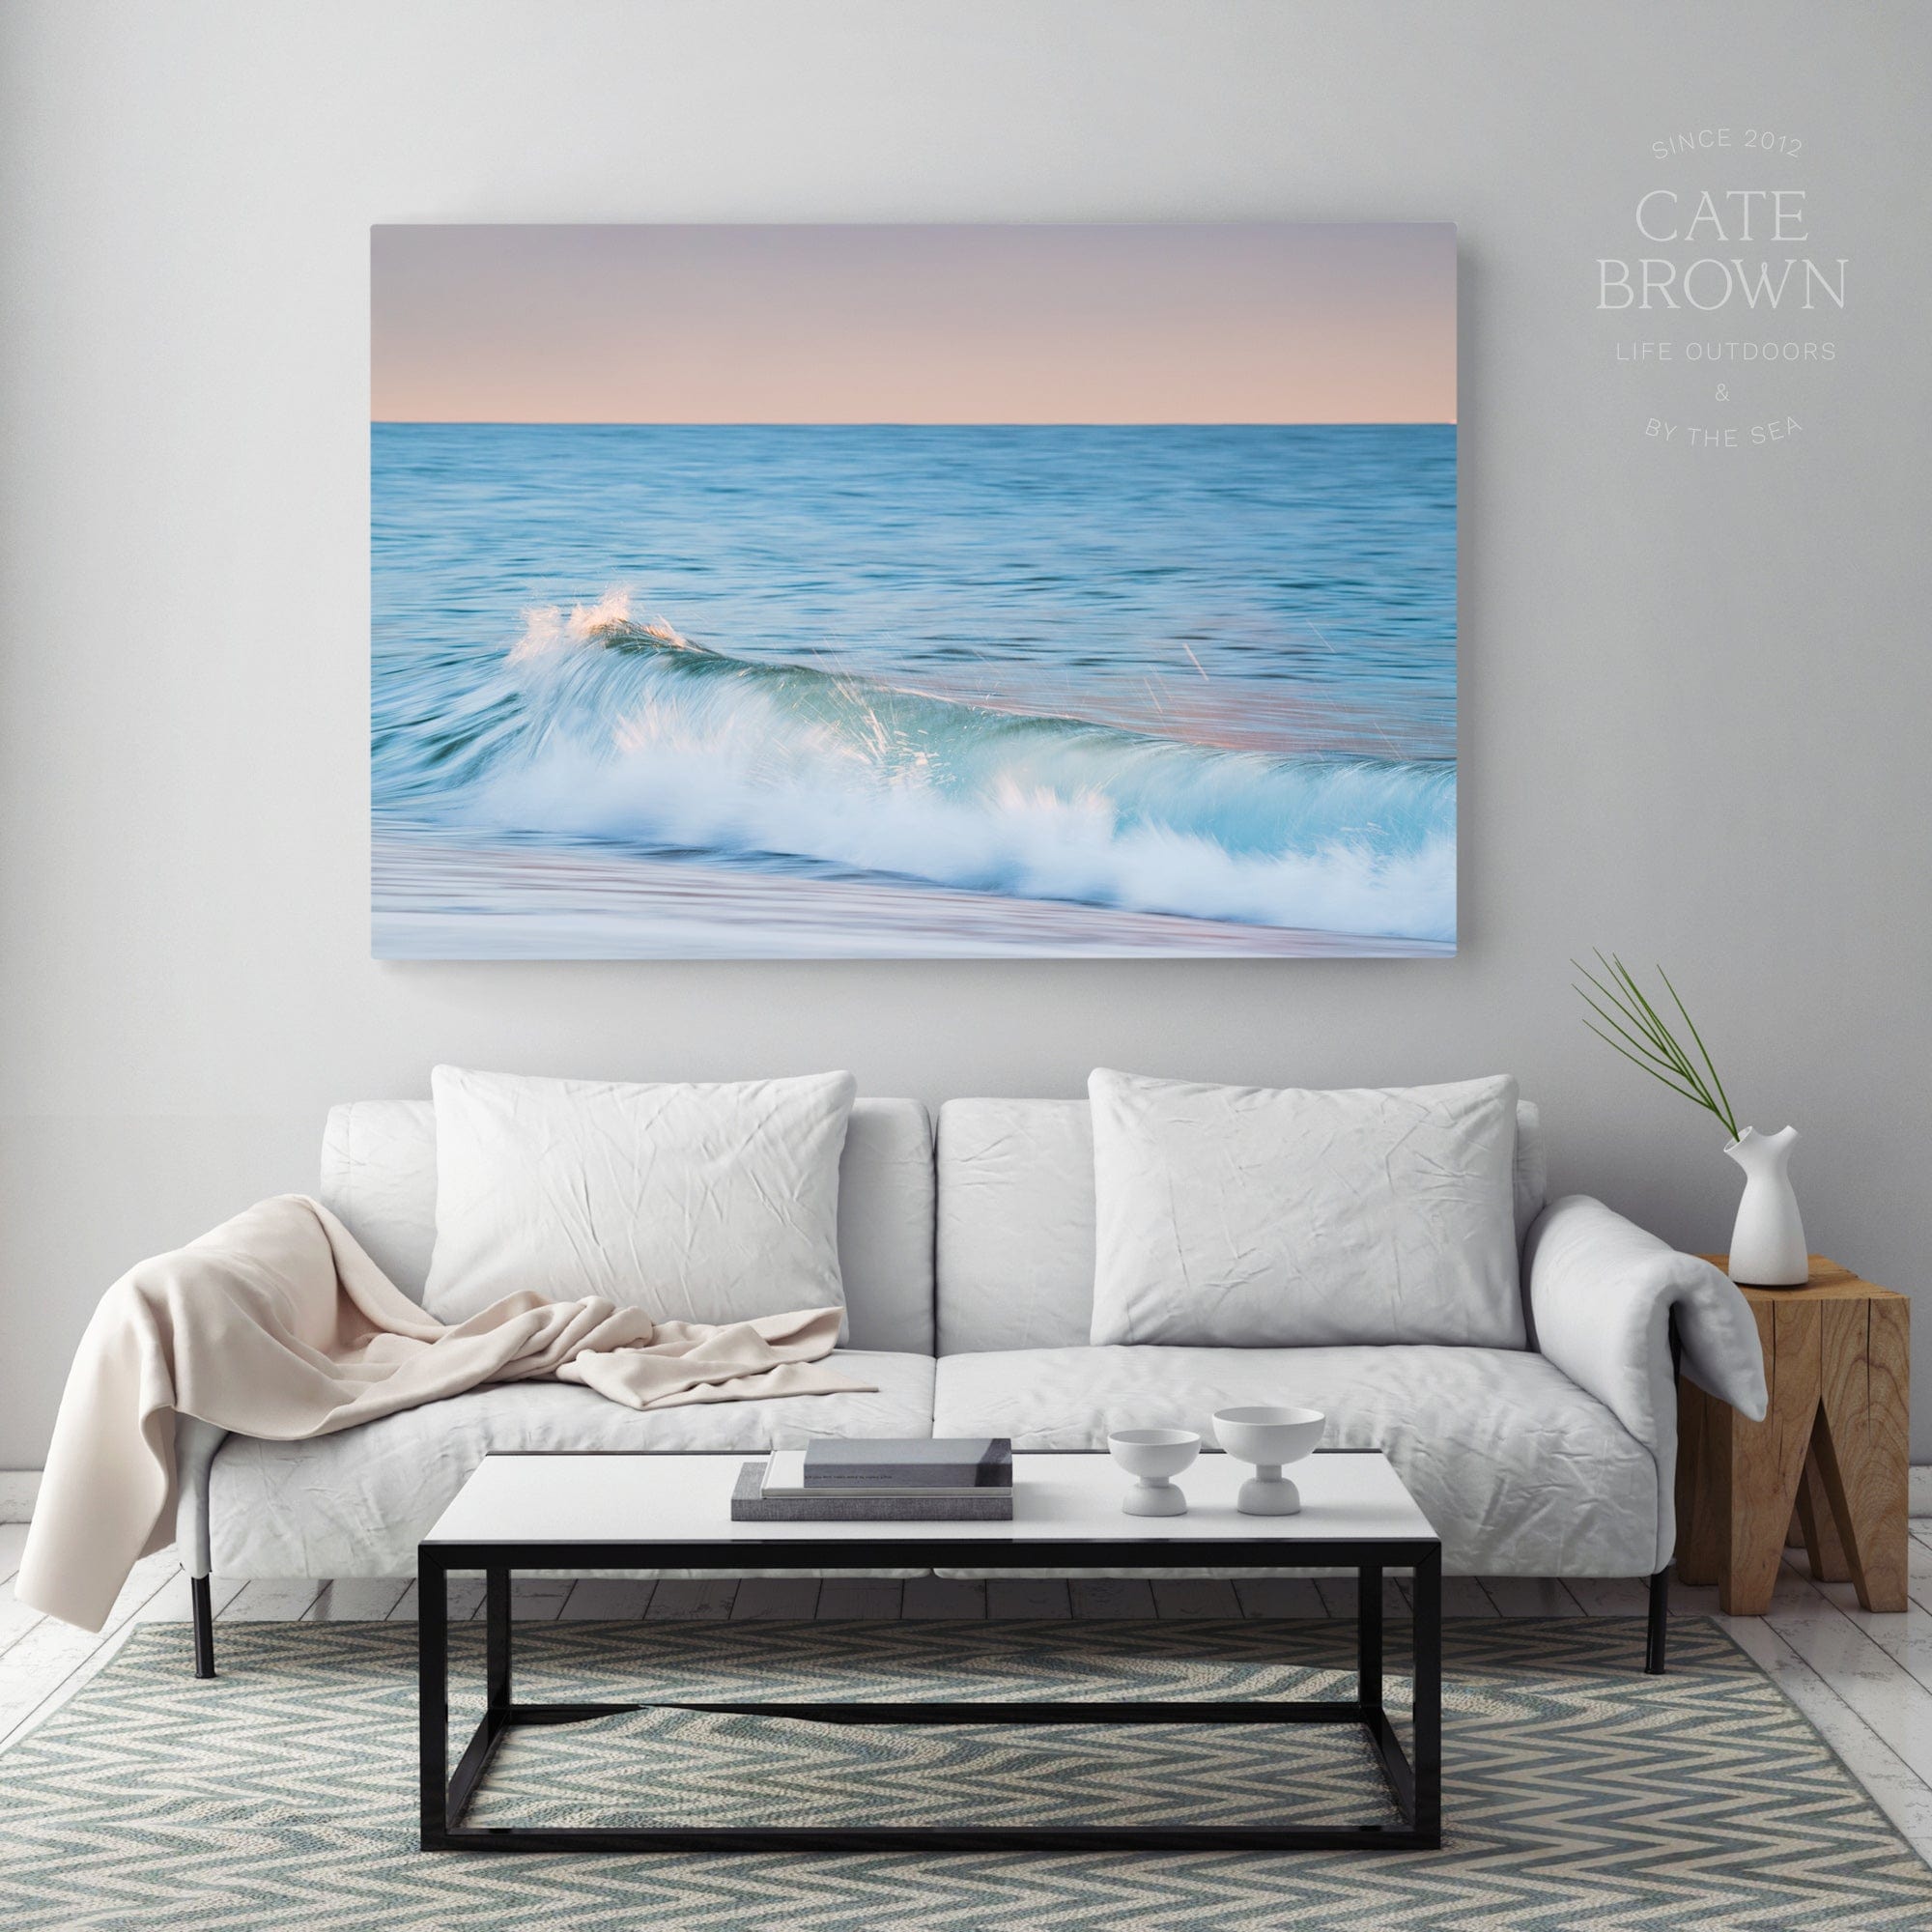 Cate Brown Photo Canvas / 16"x24" / None (Print Only) East Beach #13  //  Abstract Photography Made to Order Ocean Fine Art